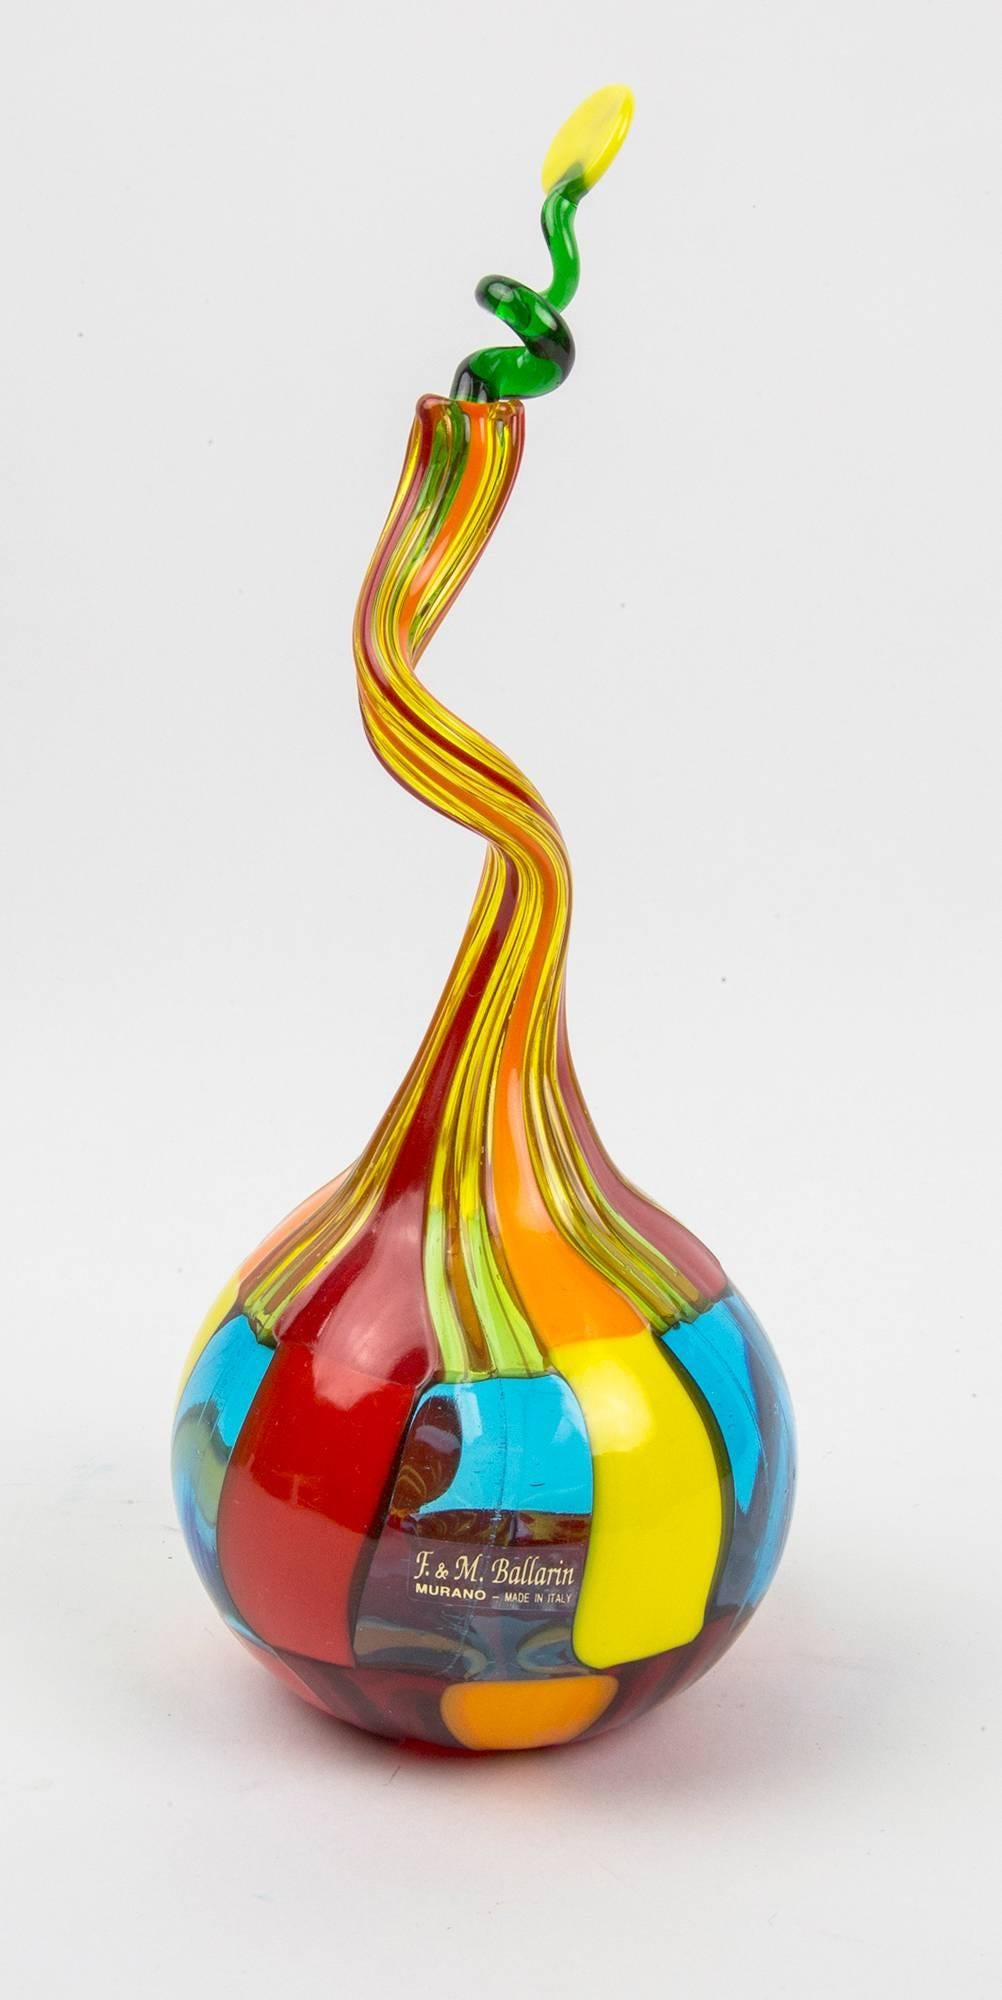 Fabulous Murano patchwork Murrine Pezzato design by Ballarin; very much in the same style of Fulvio Bianconi Venini. The decanter vase is signed with original label: F. & M. Ballarin Murano made in Italy. Approximate size: 9.5”=24cm high, including